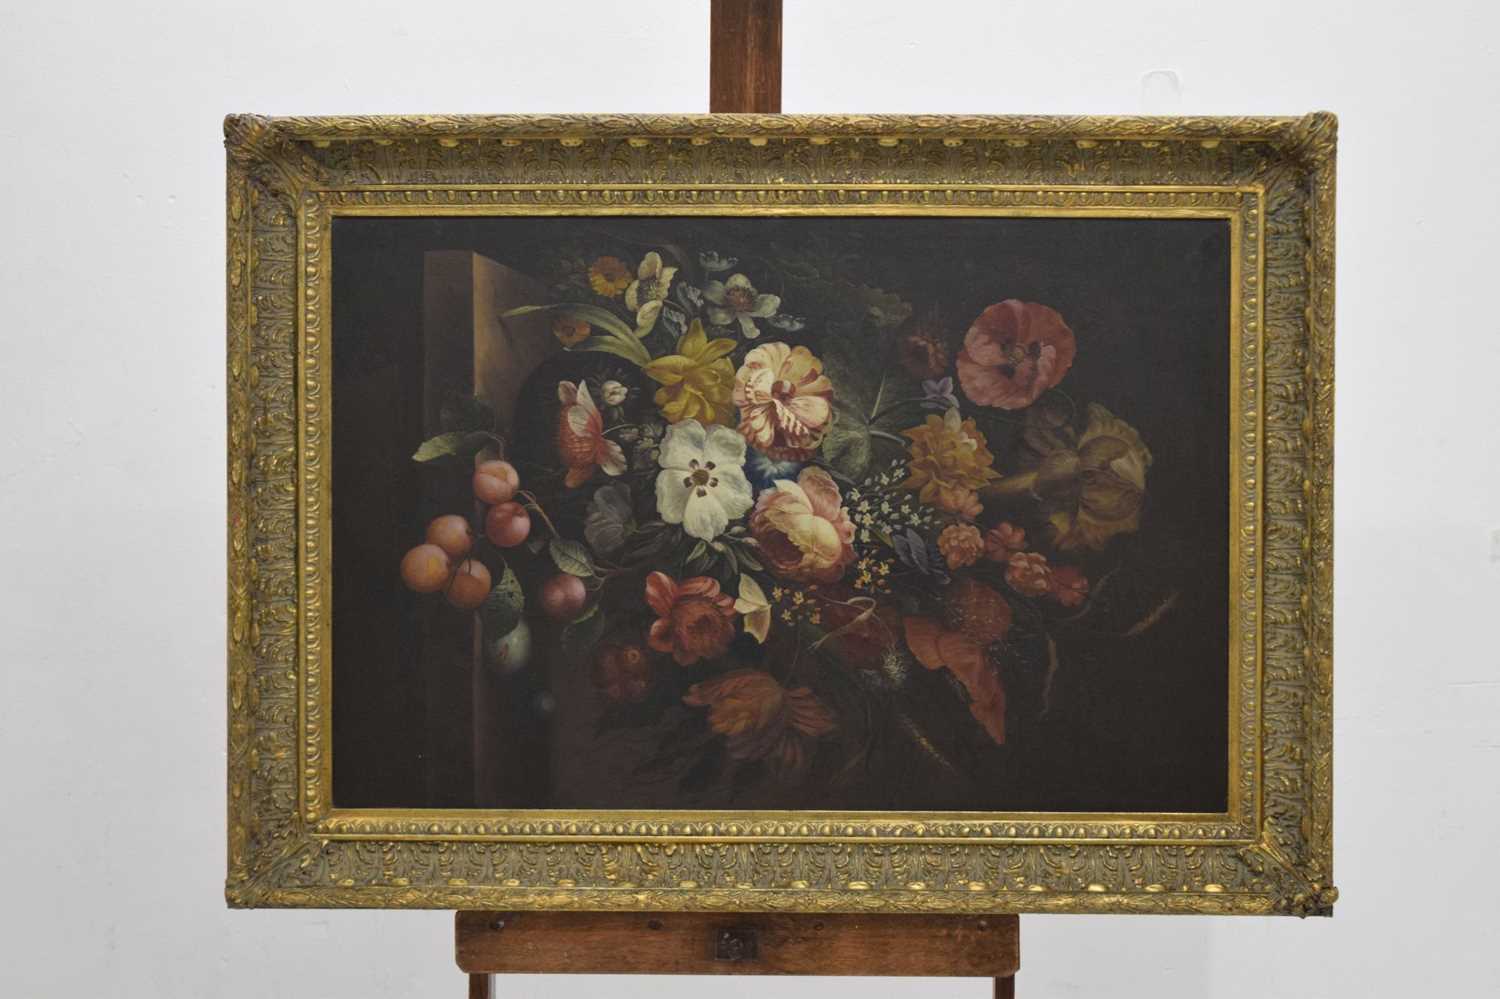 20th century Continental School - Still life with flowers, in 17th century taste - Image 9 of 10